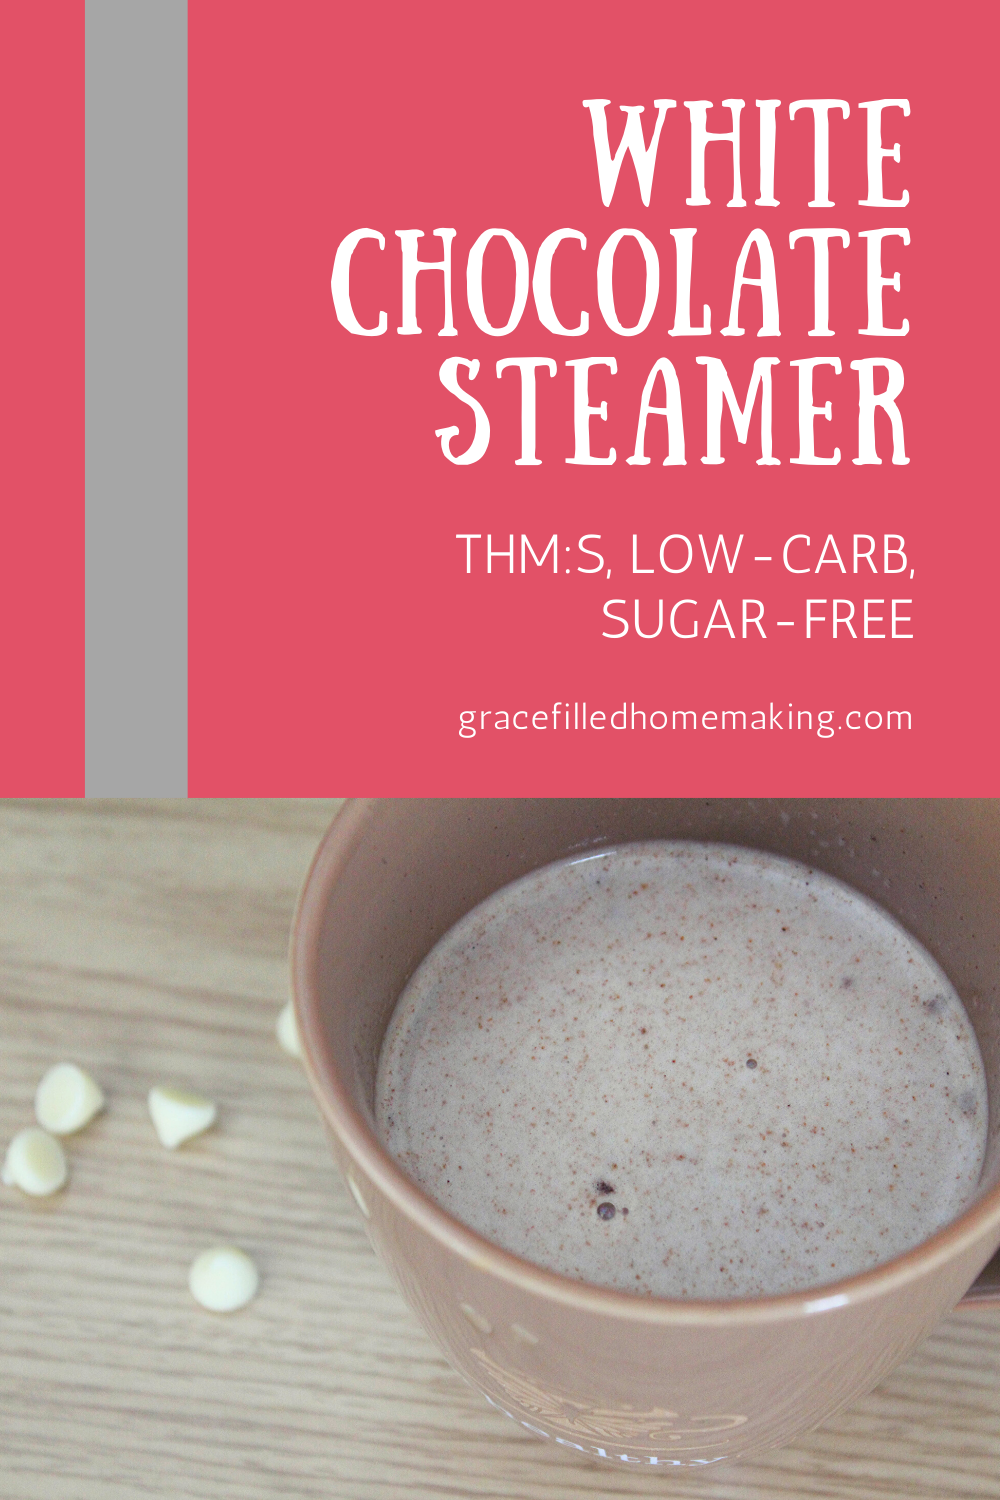 This White Chocolate Steamer is stupid-easy, delicious, and best of all? On plan! With only 4 ingredients, you can make a decadent, steaming drink!